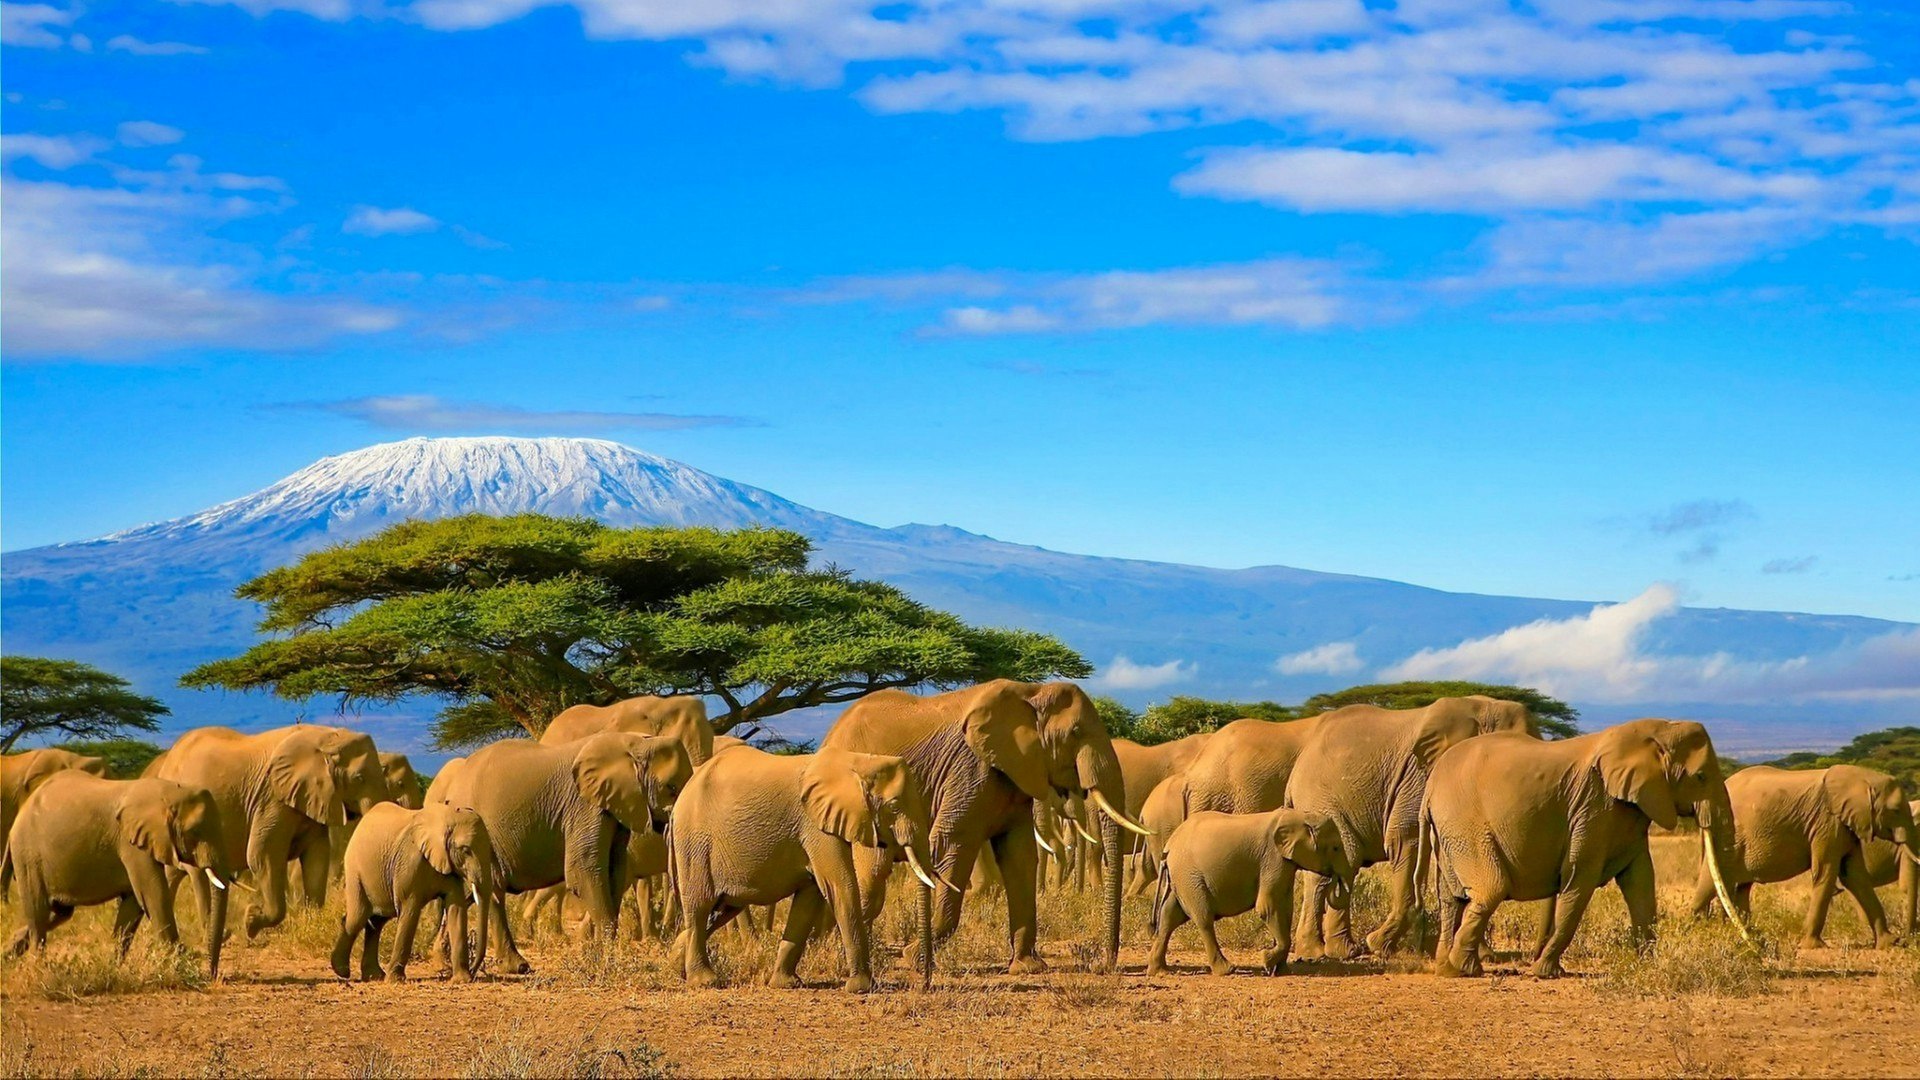 Herd of african elephants on a safari trip to Kenya and a snow capped Kilimanjaro